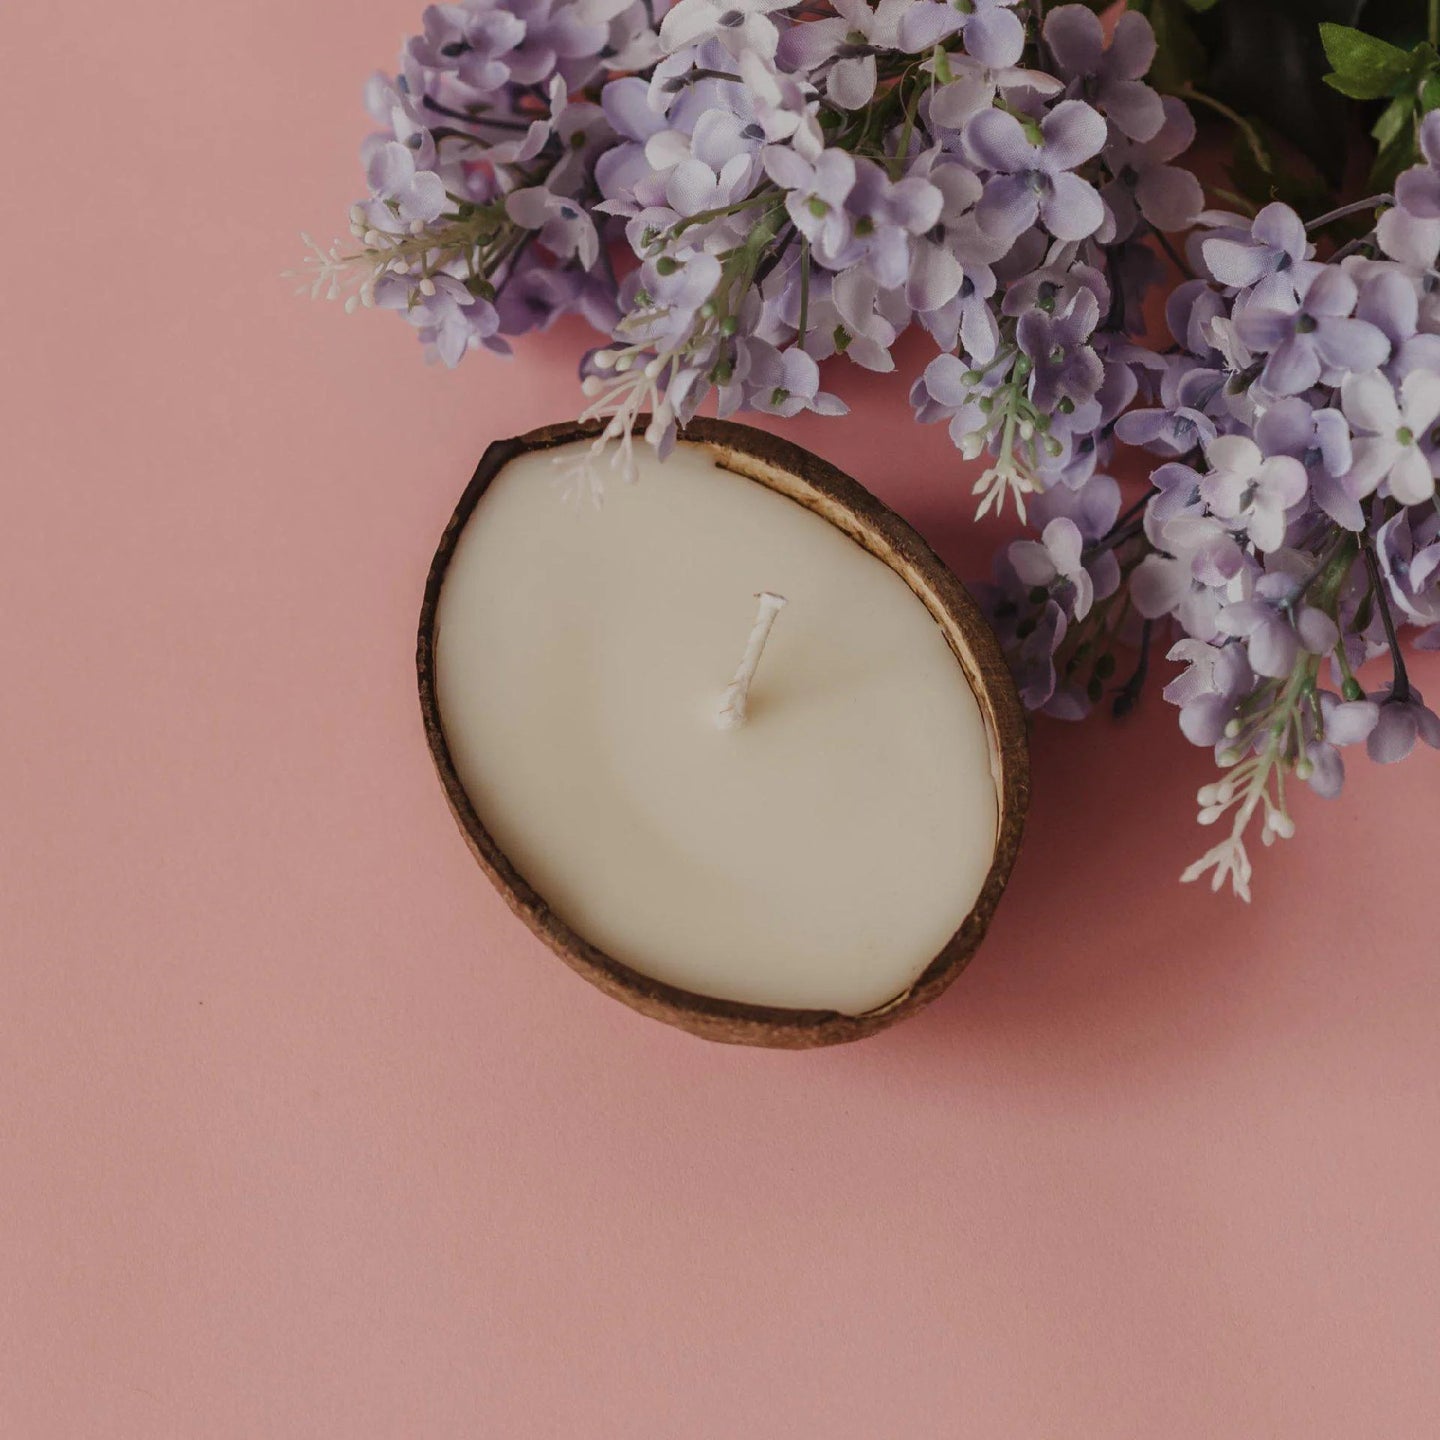 Backyard Candles 5.5oz Coconut Shell Candle-Lilacs & Lilies